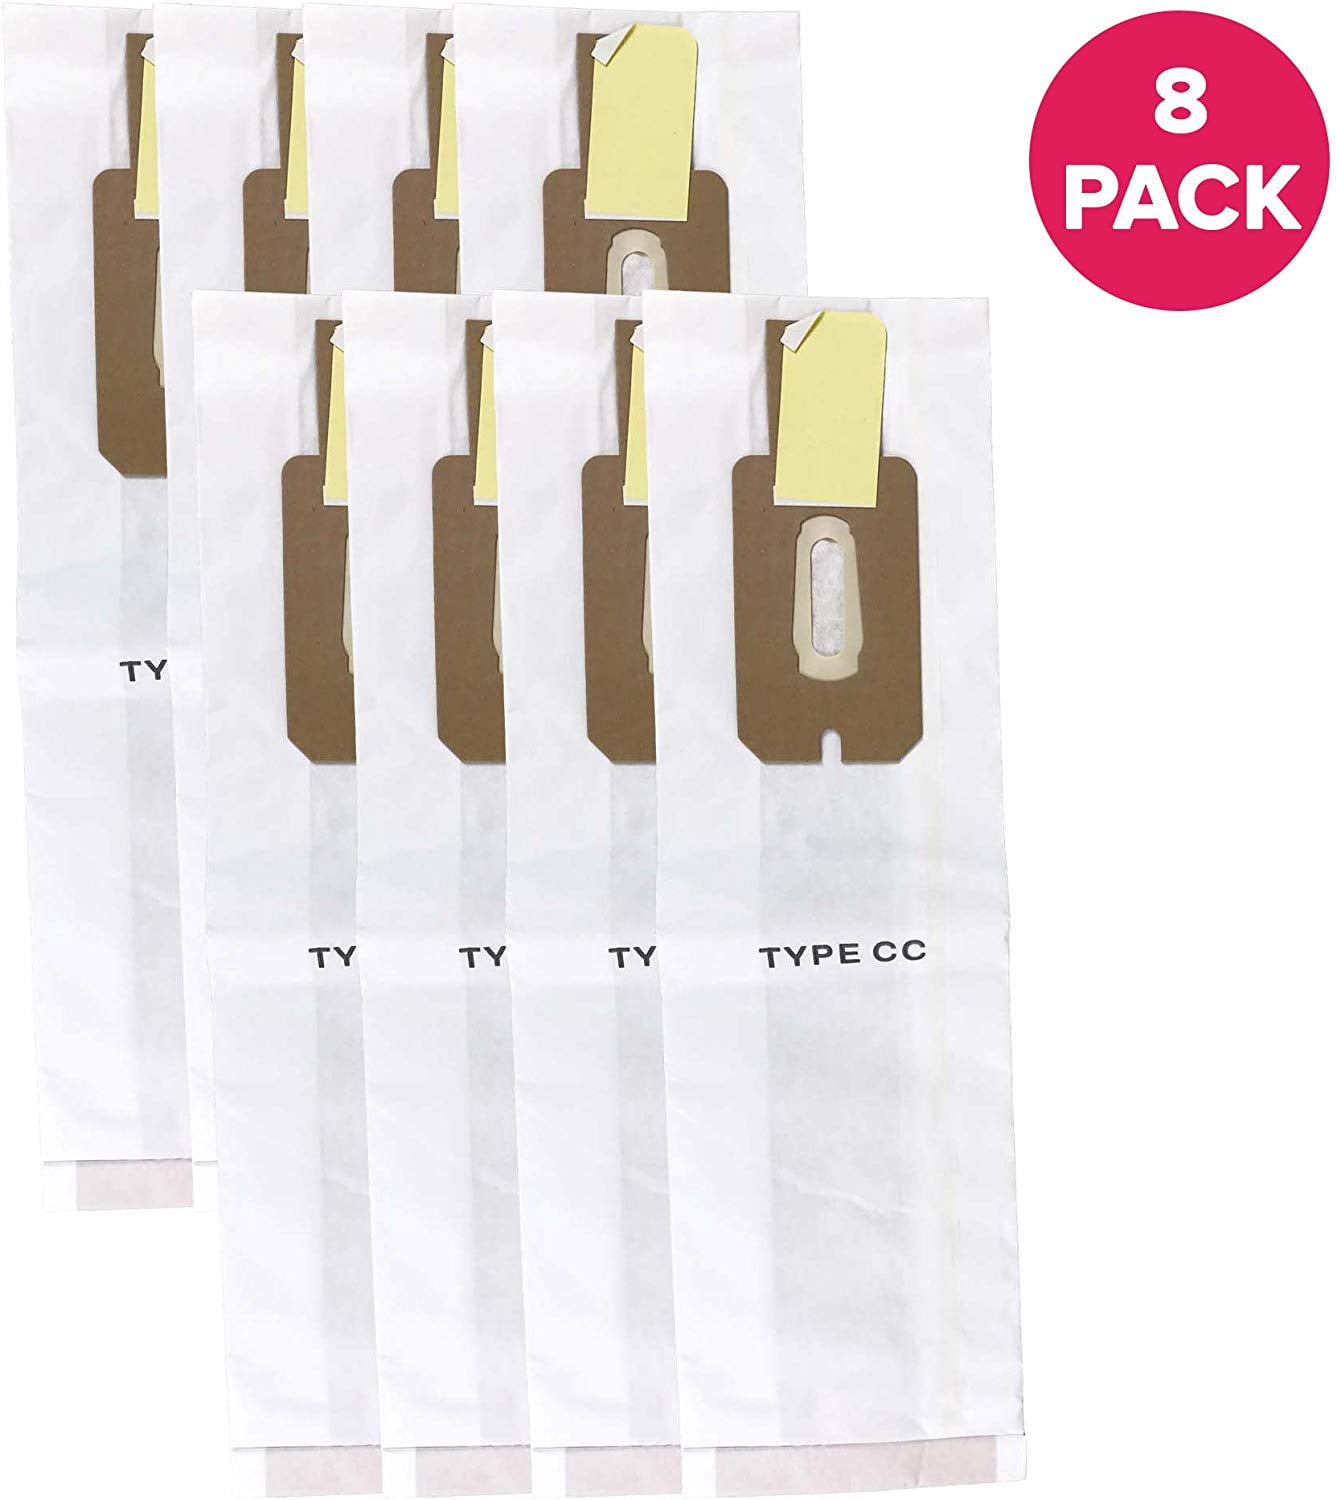 2 Packs of 8 Oreck XL Type CC  Vaccum Cleaner Bags CCPK8 